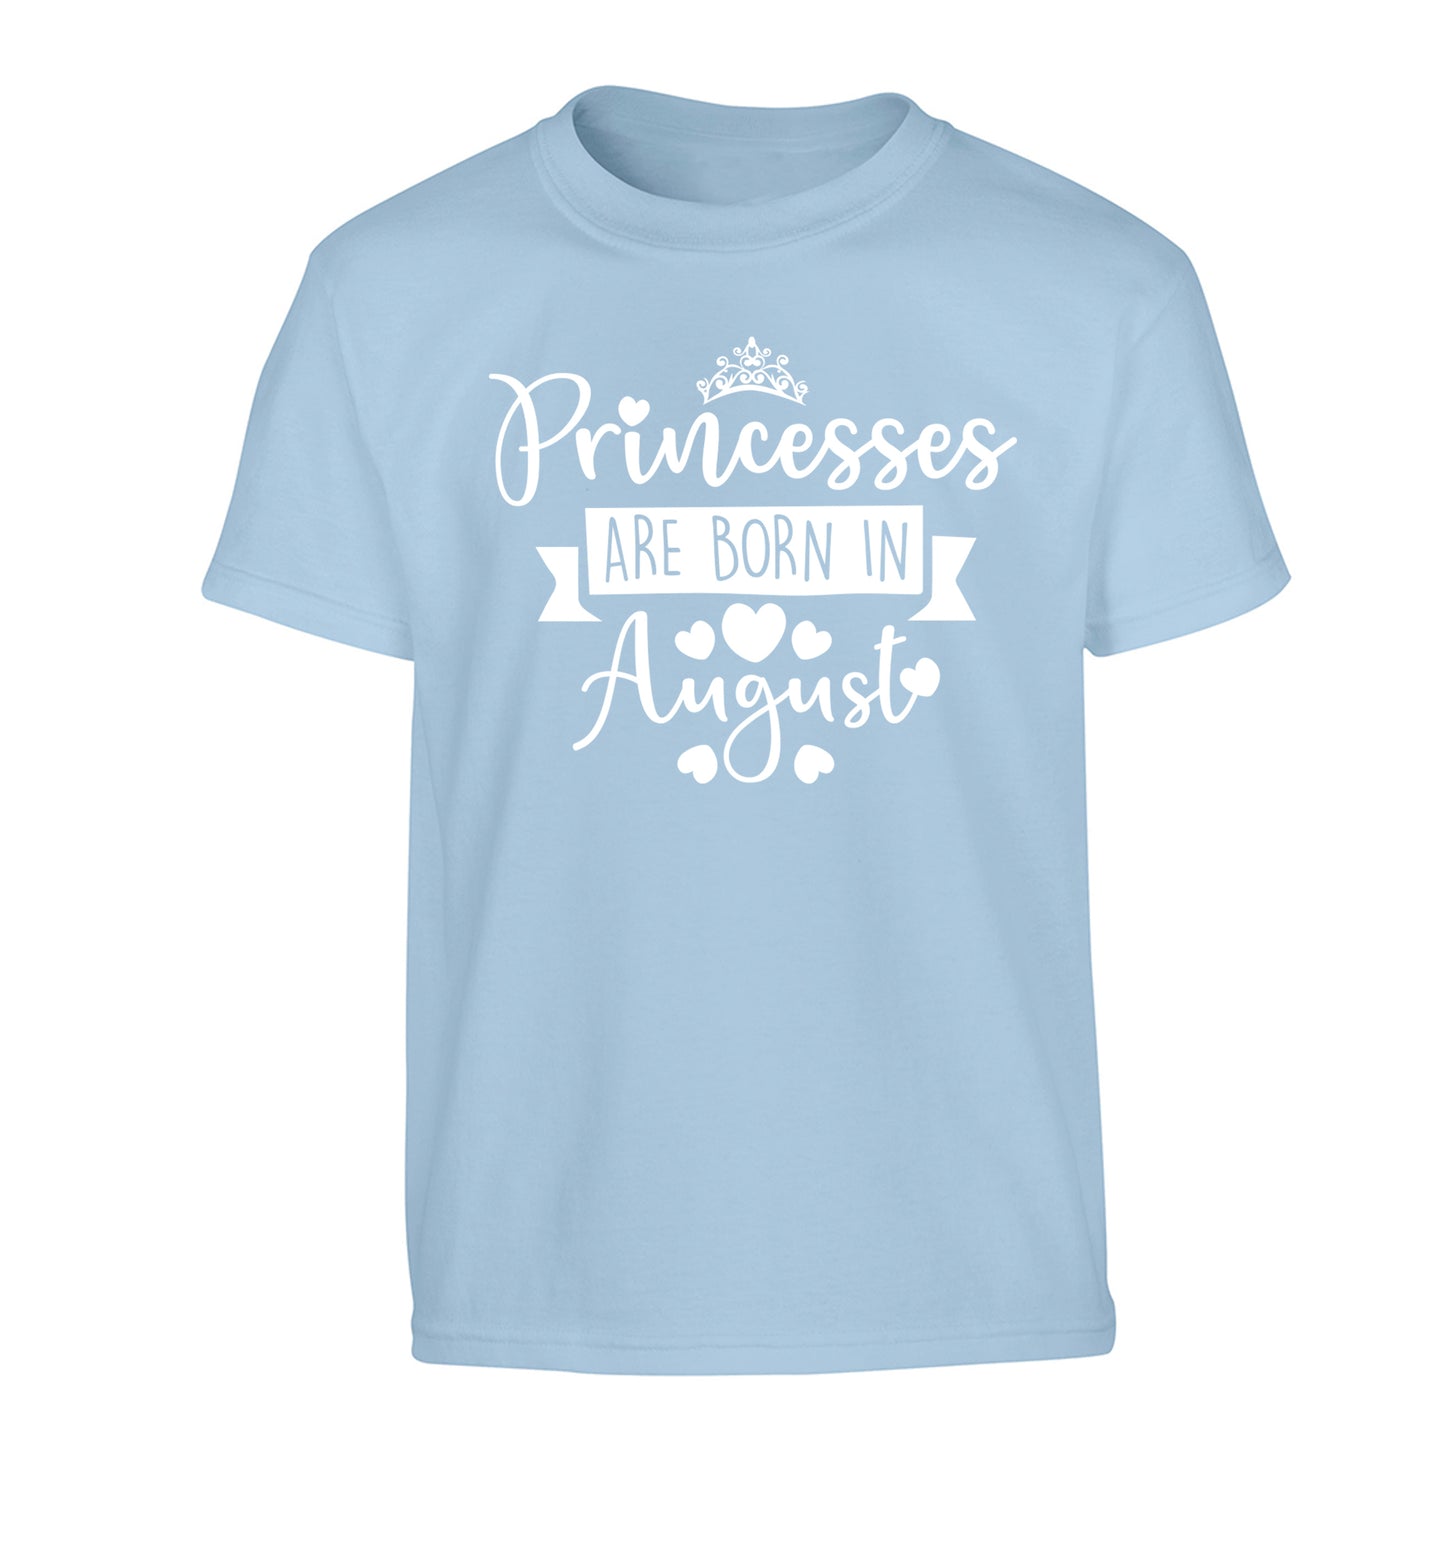 Princesses are born in August Children's light blue Tshirt 12-13 Years